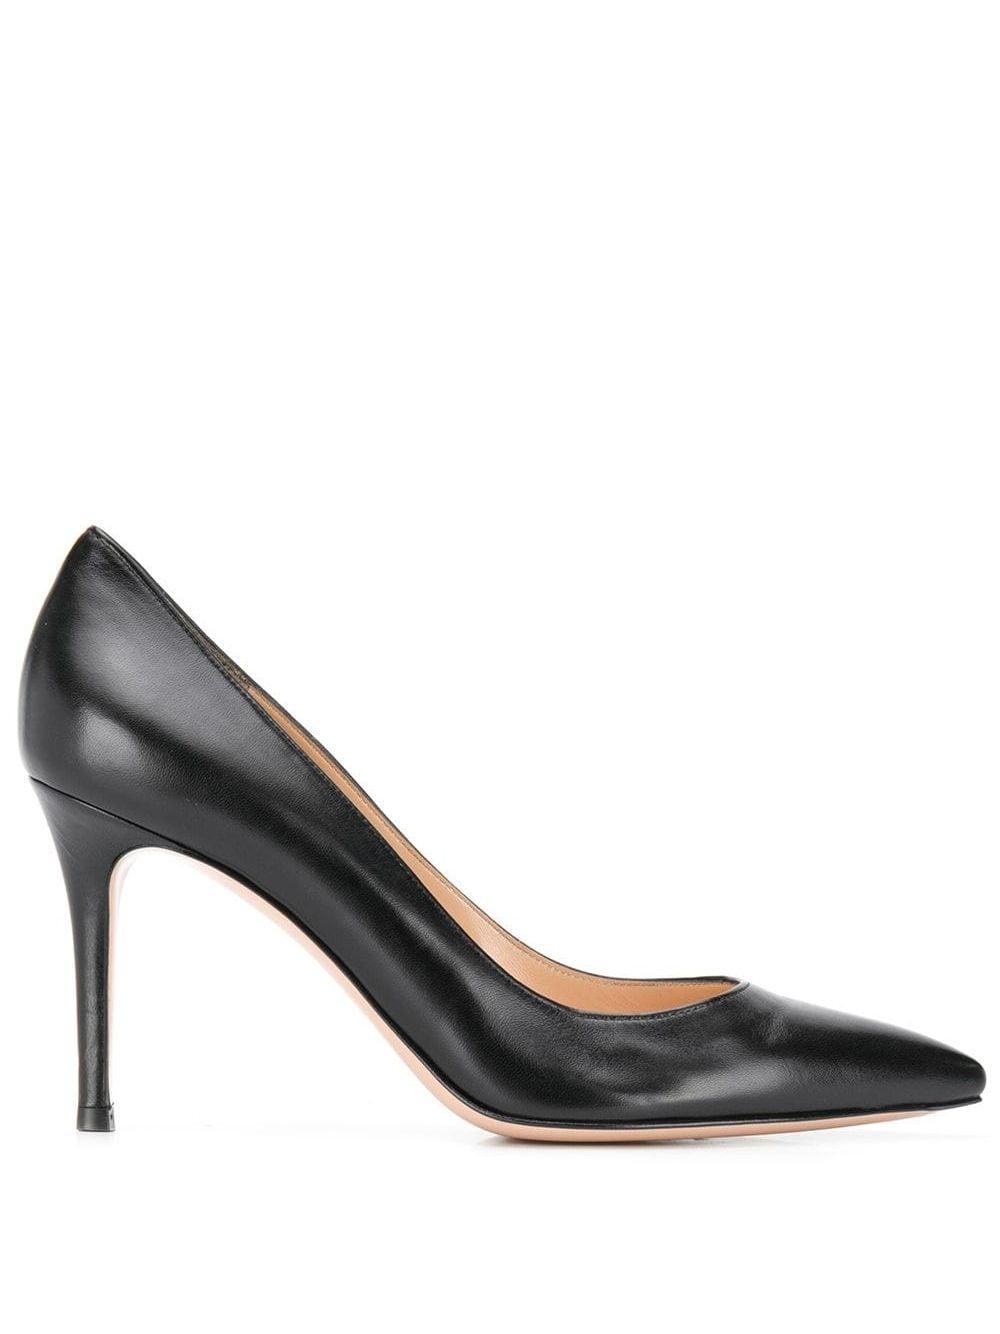 Gianvito Rossi Leather Pointed Pumps in Black - Save 49% - Lyst